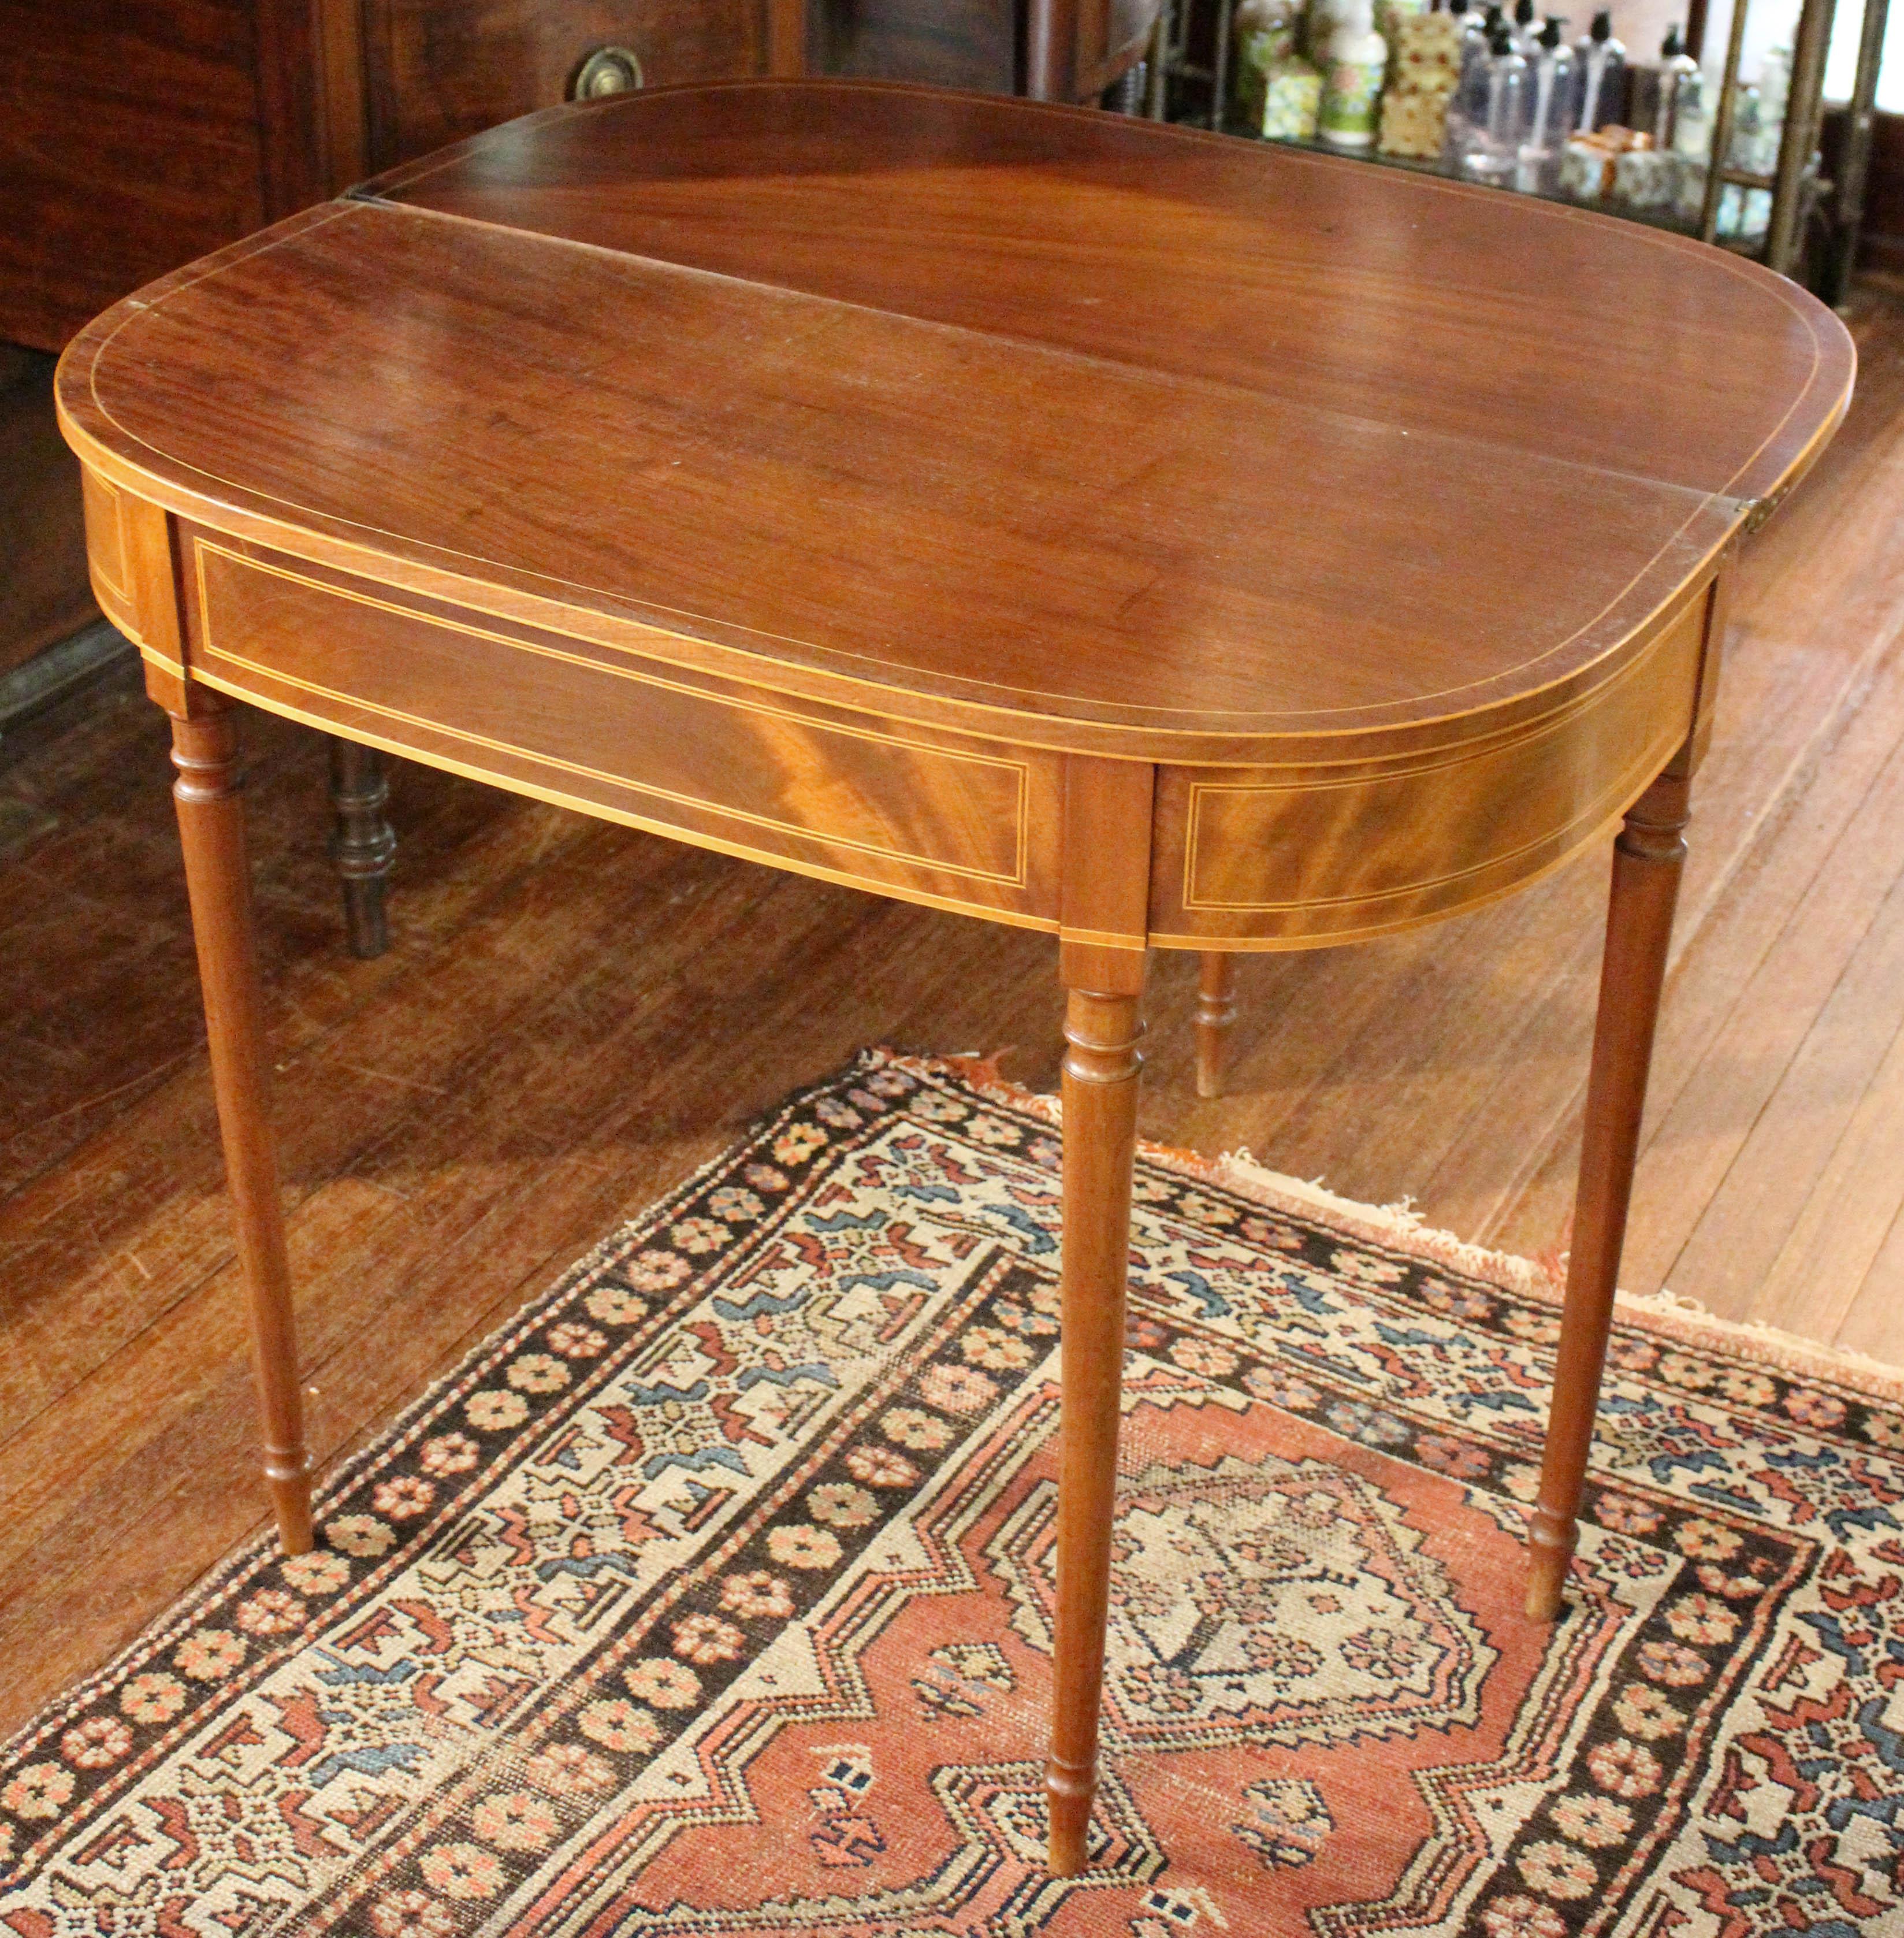 Early 19th Century English Demilune Form Tea Table 6